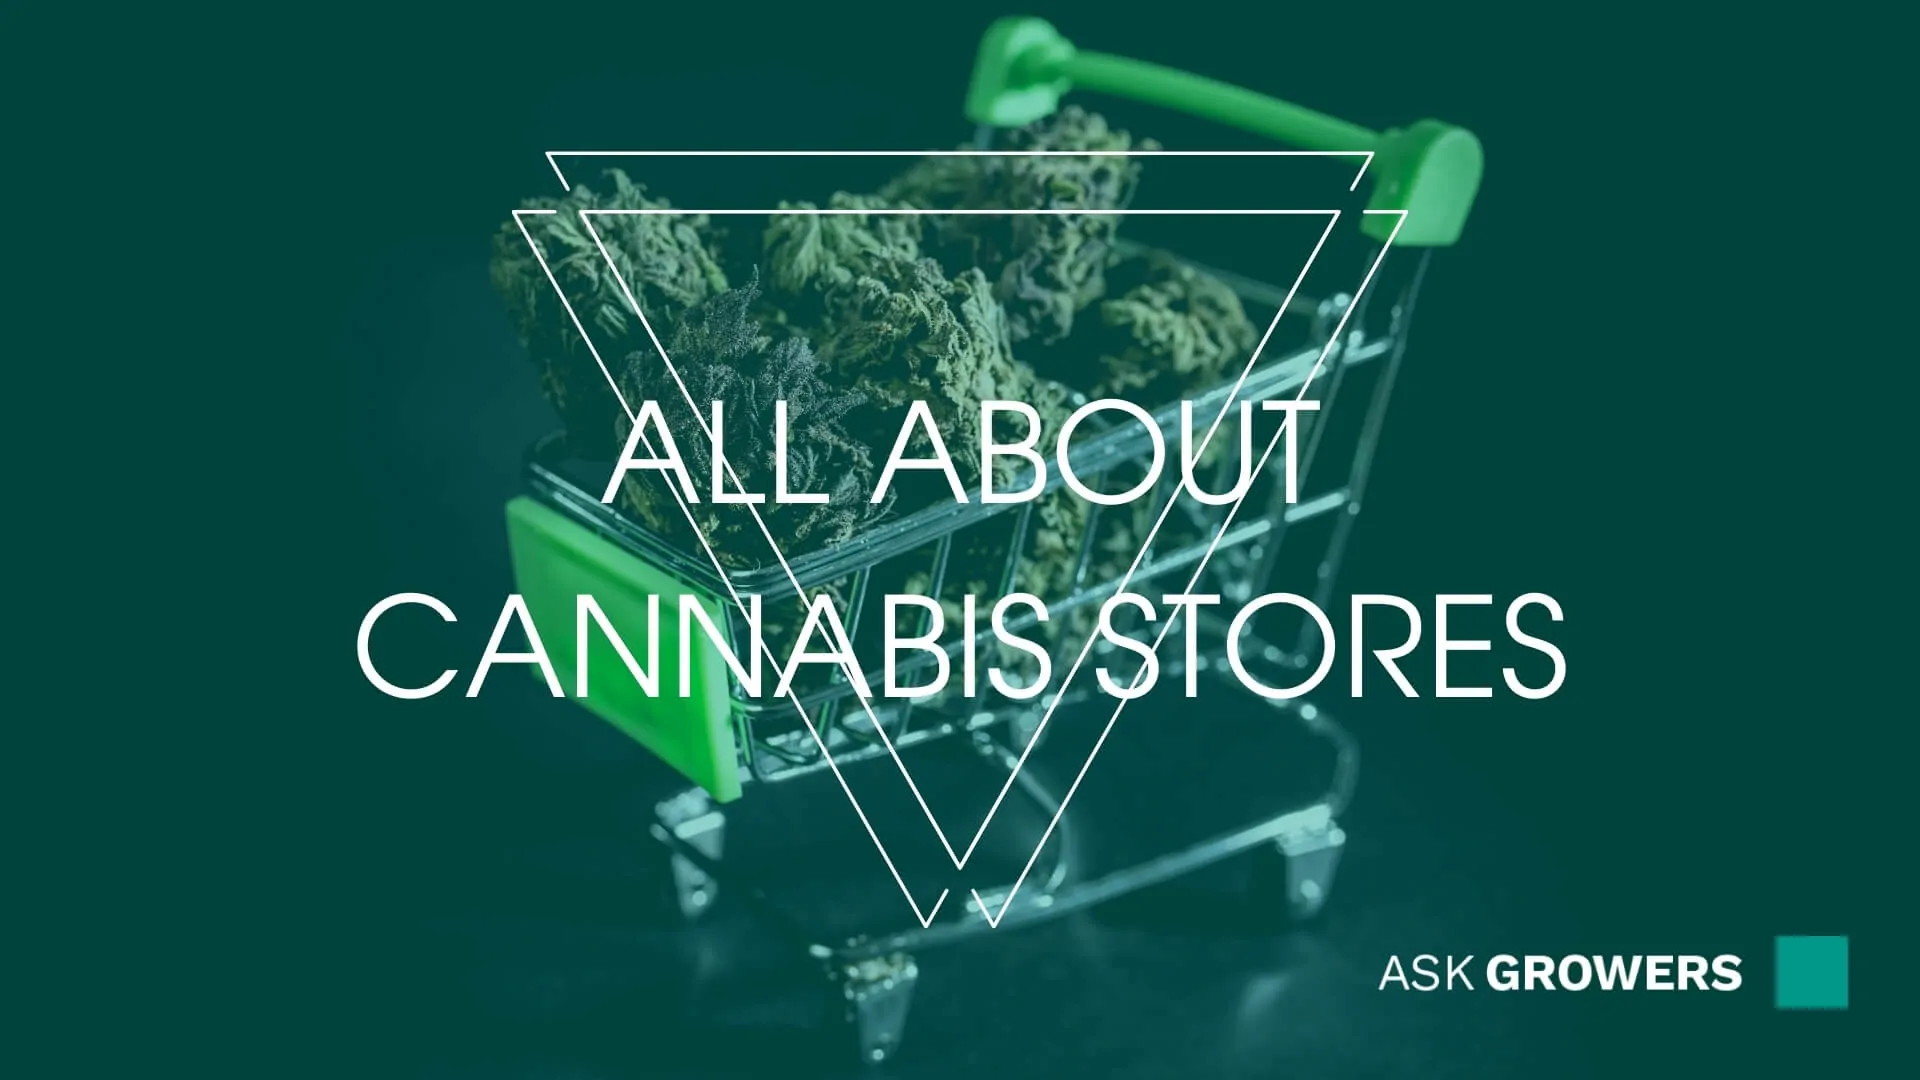 All About Cannabis Stores